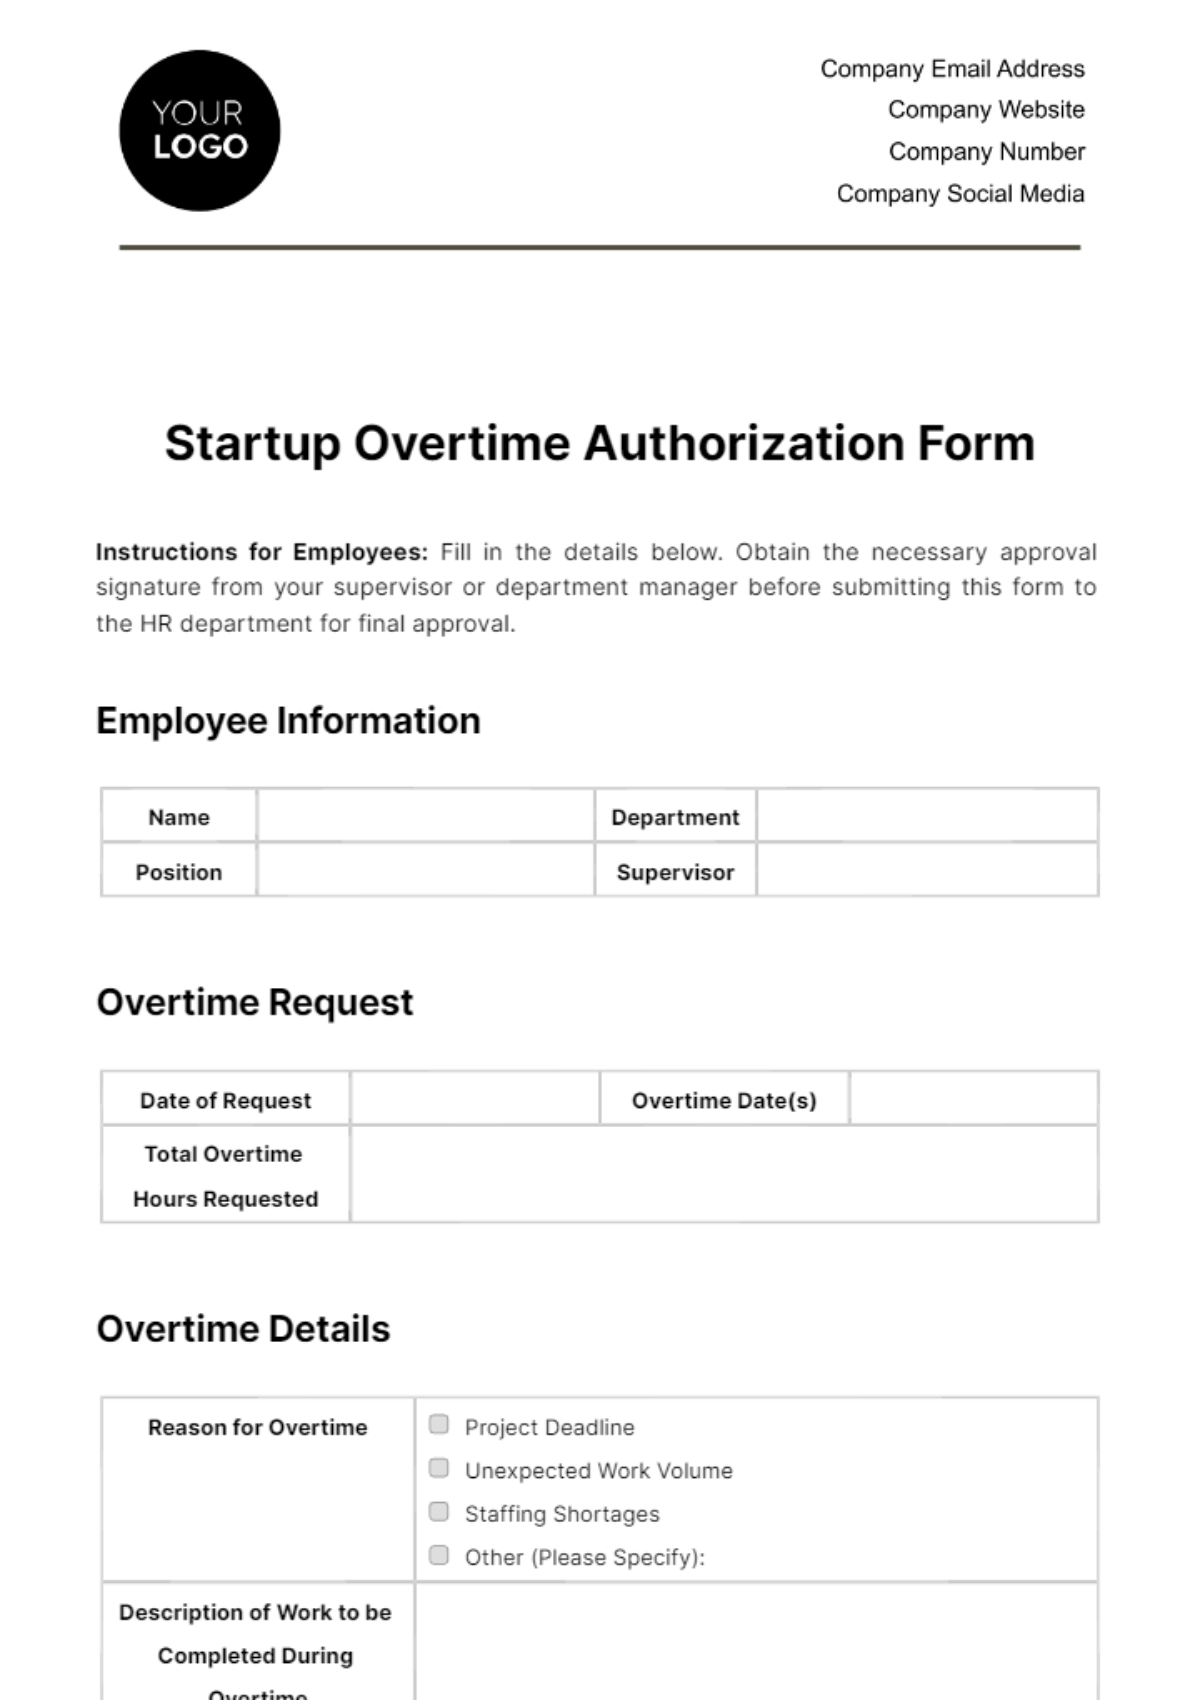 Free Startup Overtime Authorization Form Template